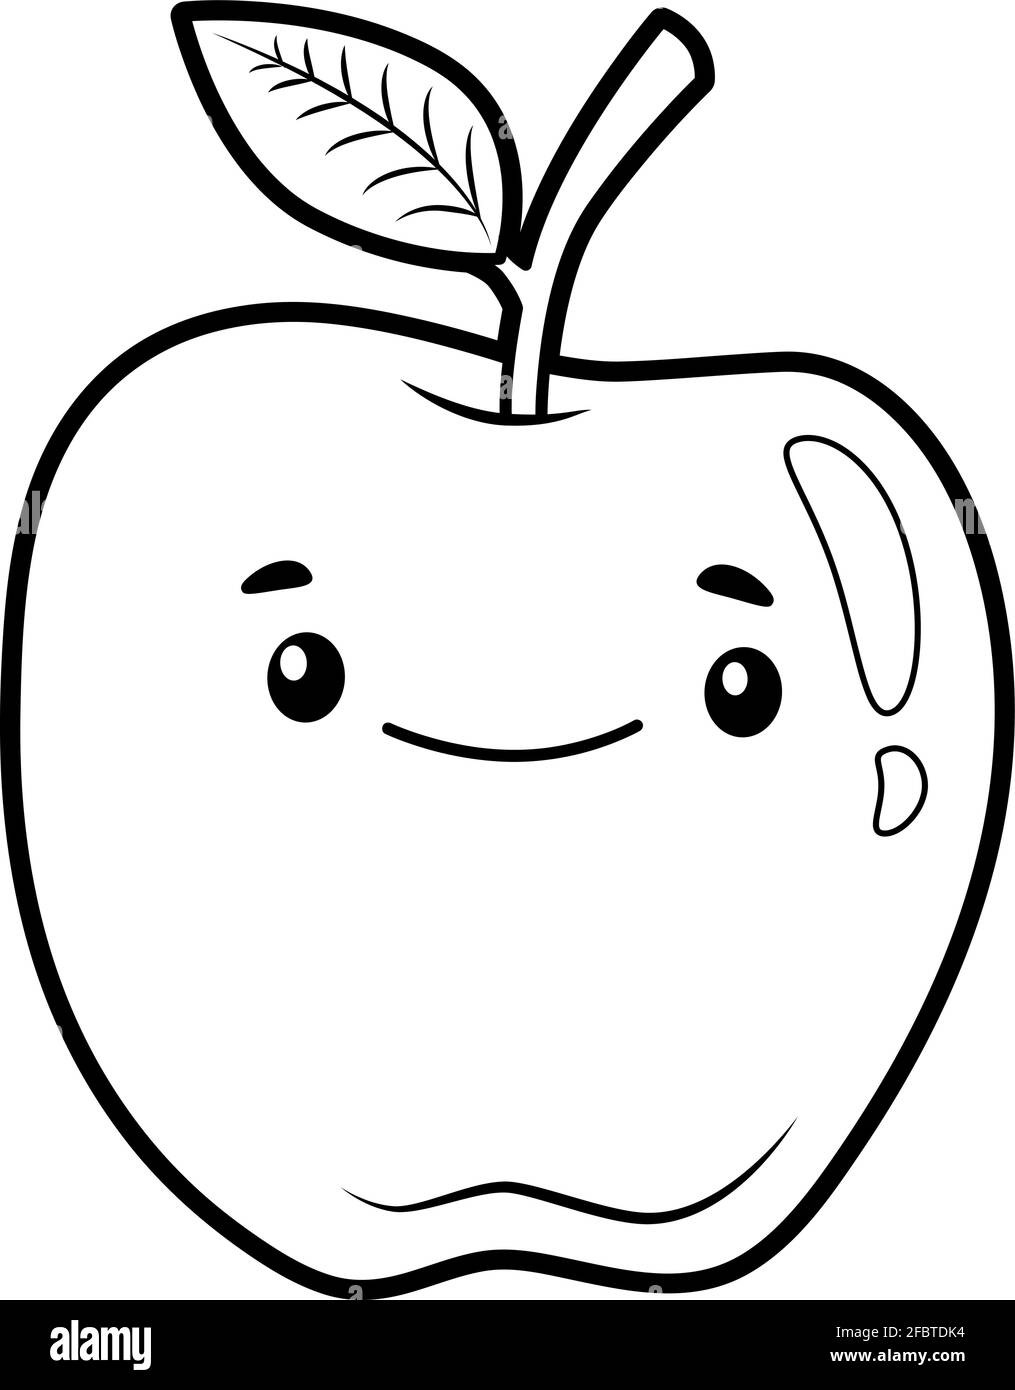 Coloring book or page for kids. apple black and white vector ...